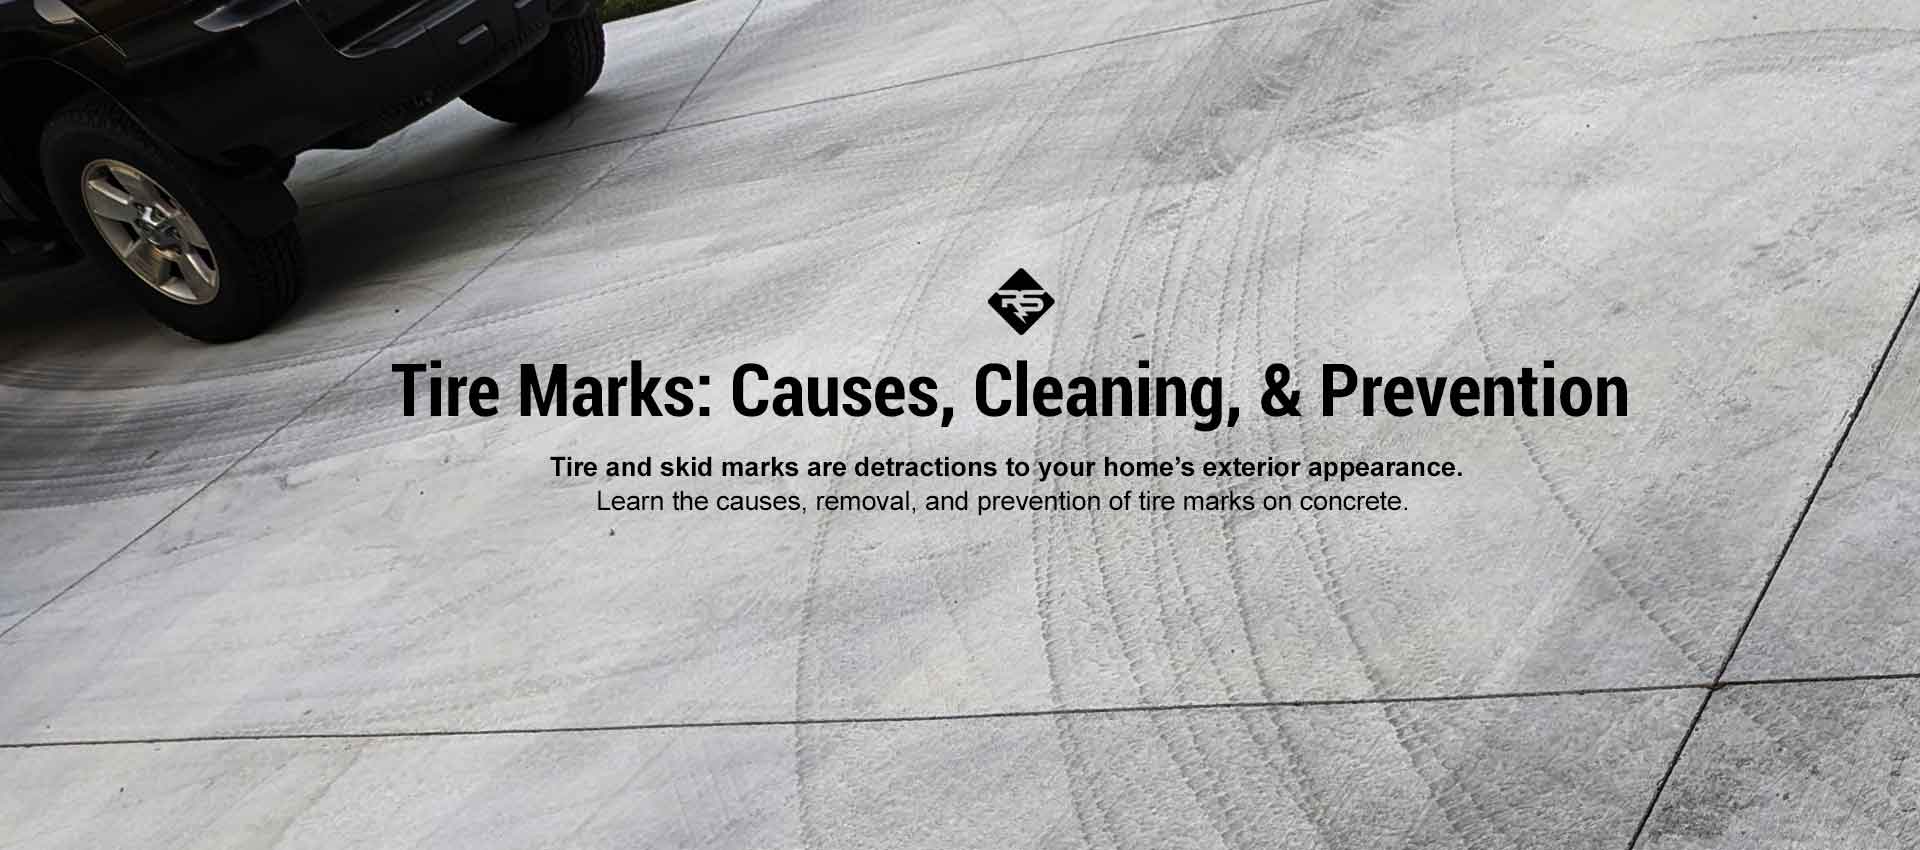 TIre Marks: Causes, Cleaning, and Prevention